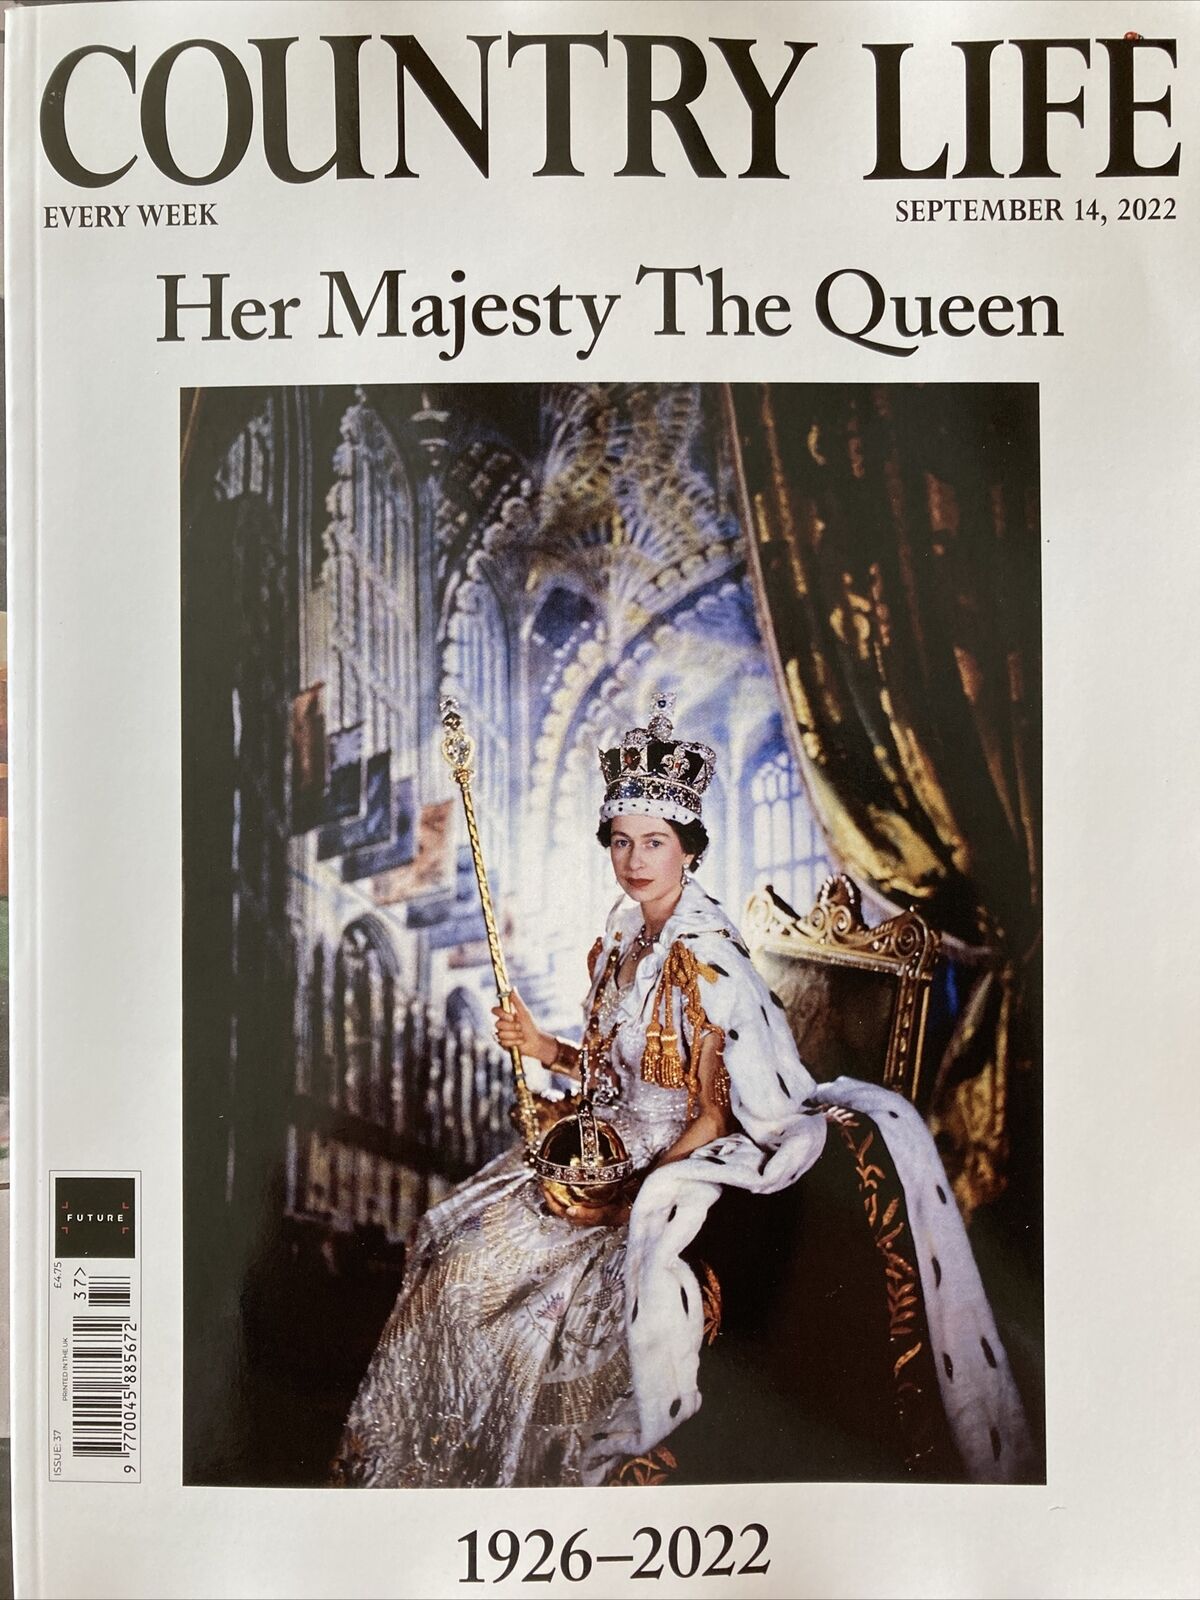 Country Life Magazine September 14, 2022 Her Majesty The Queen